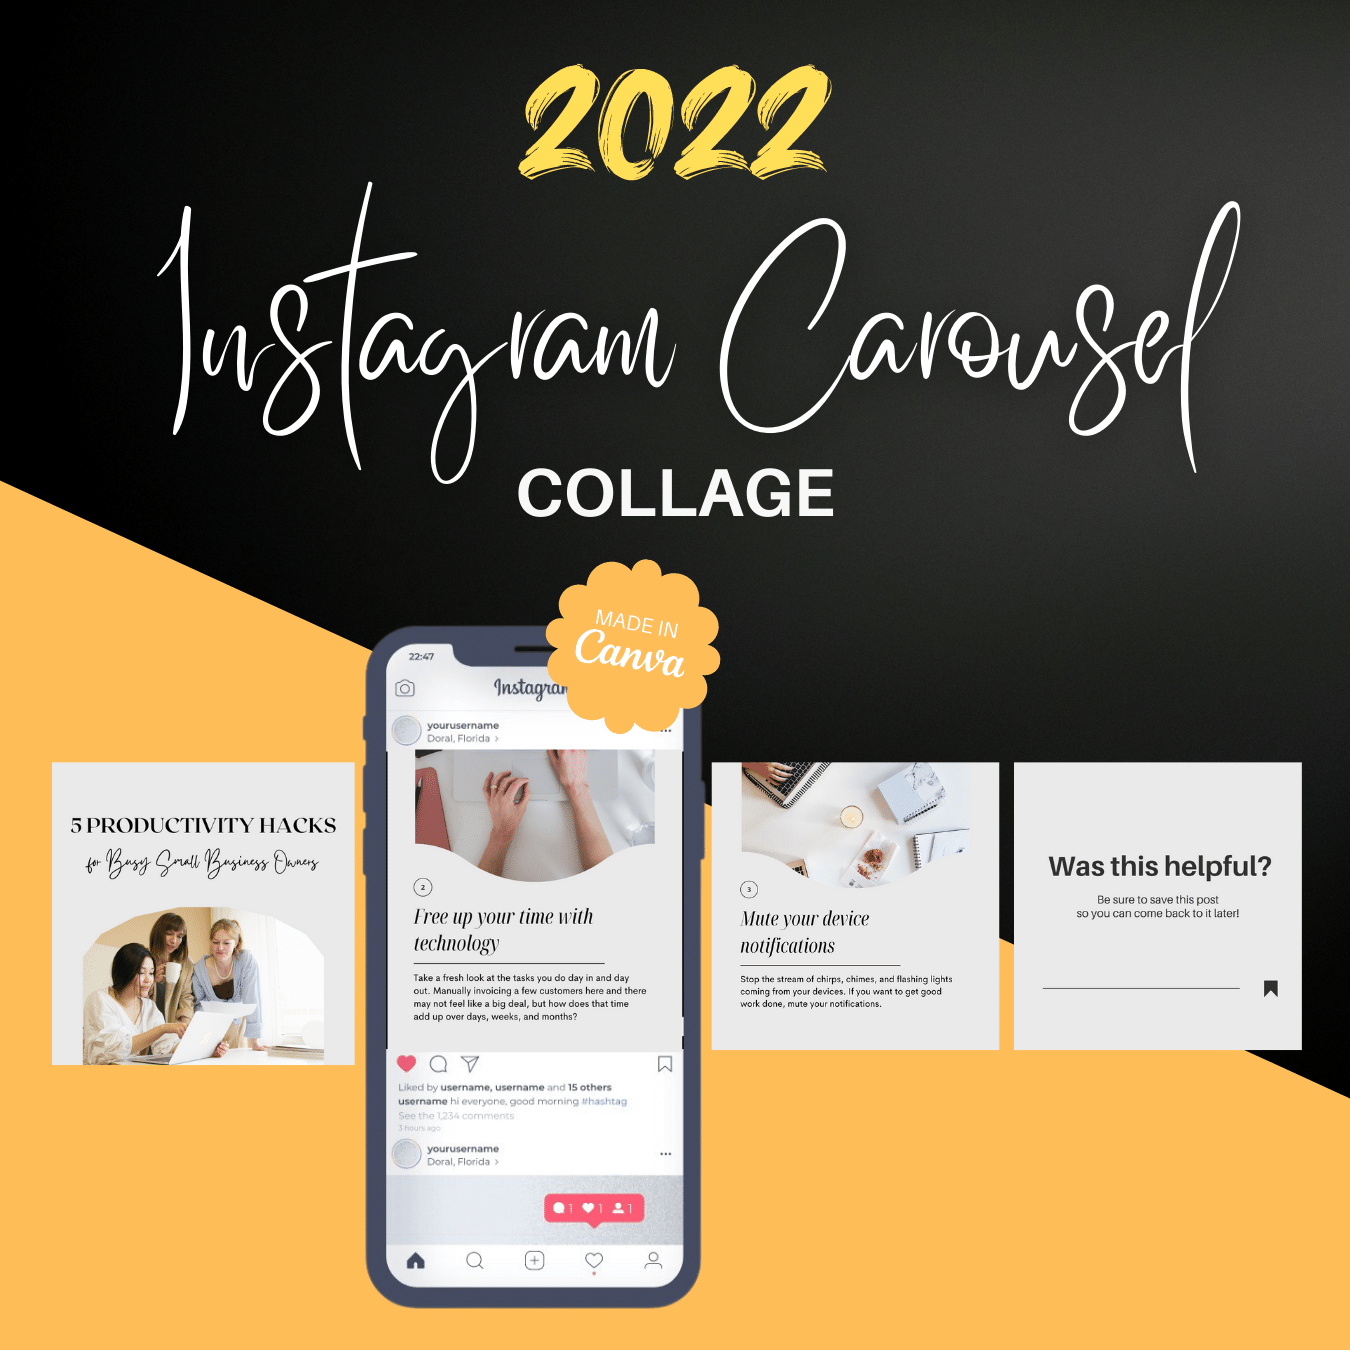 2022 Instagram Carousel - Collage